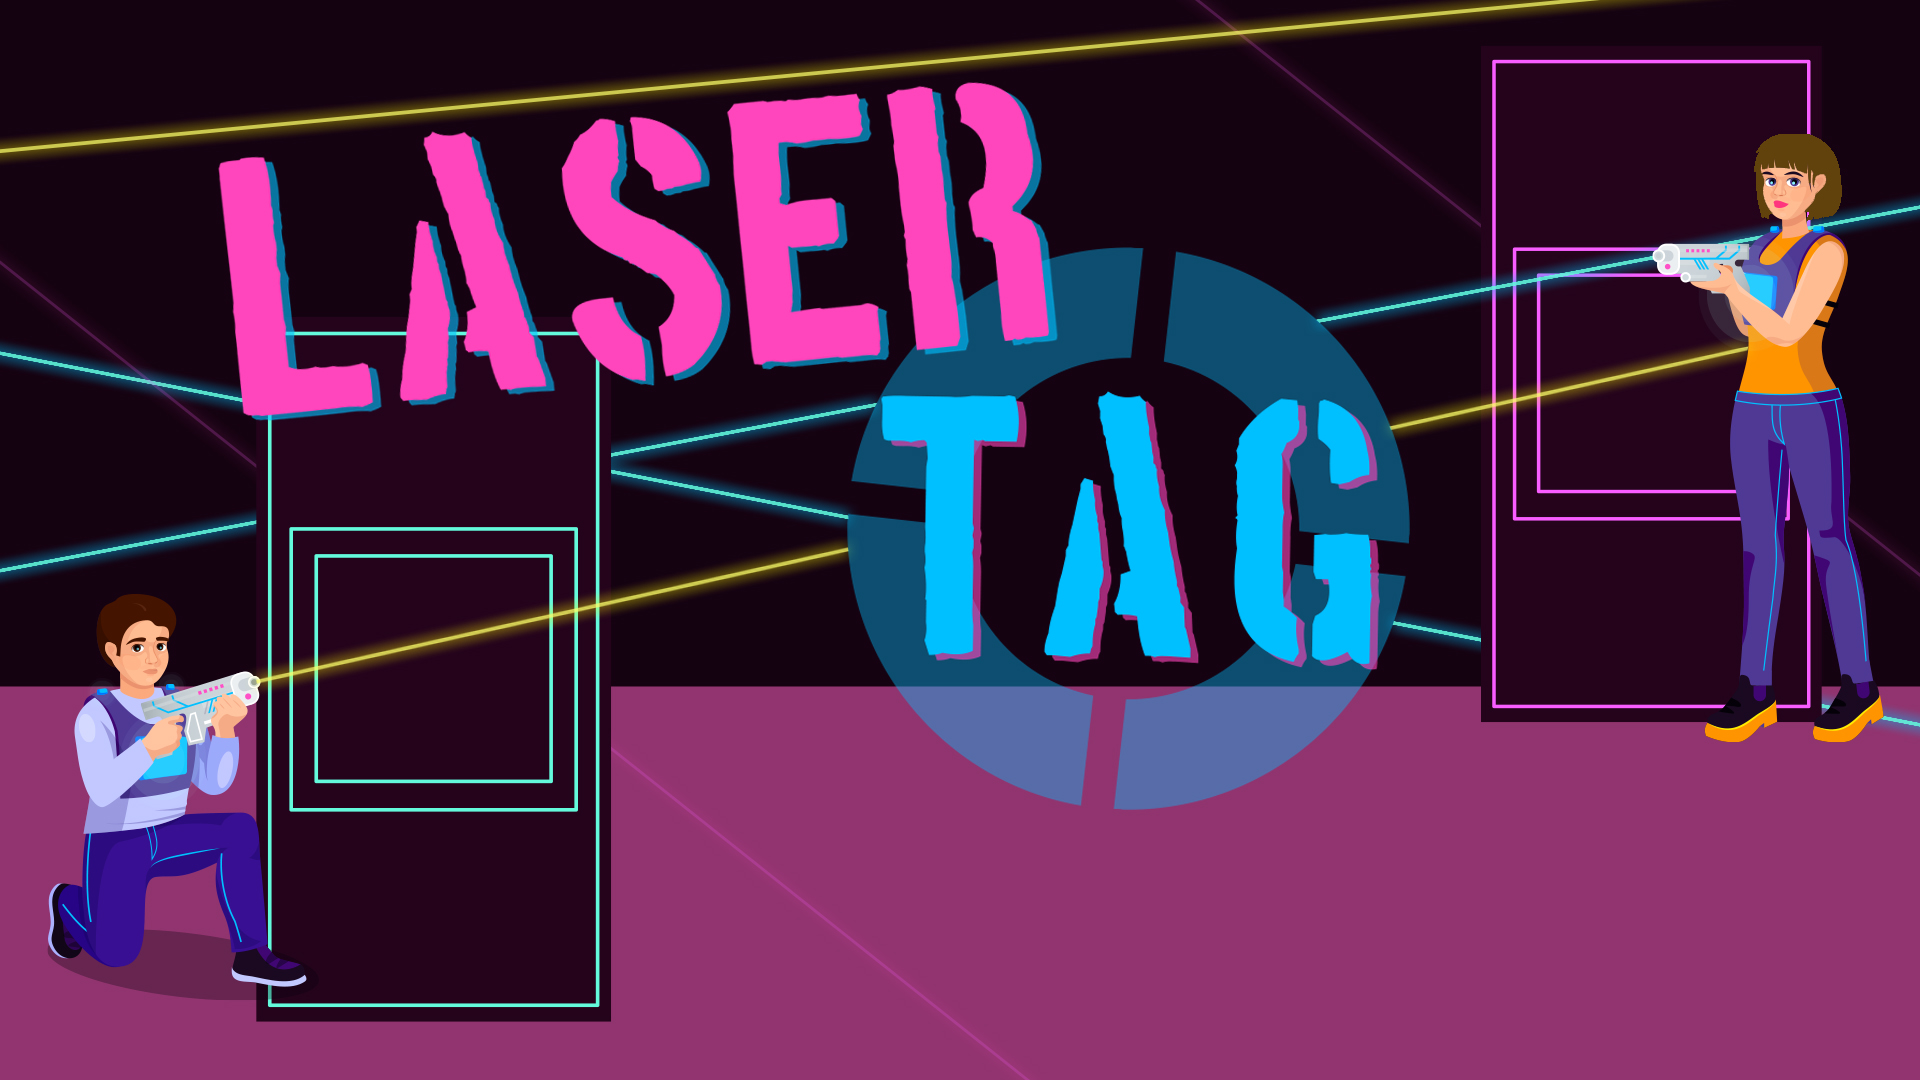 Image reads "Laser Tag" against a Laser Tag playing field background.